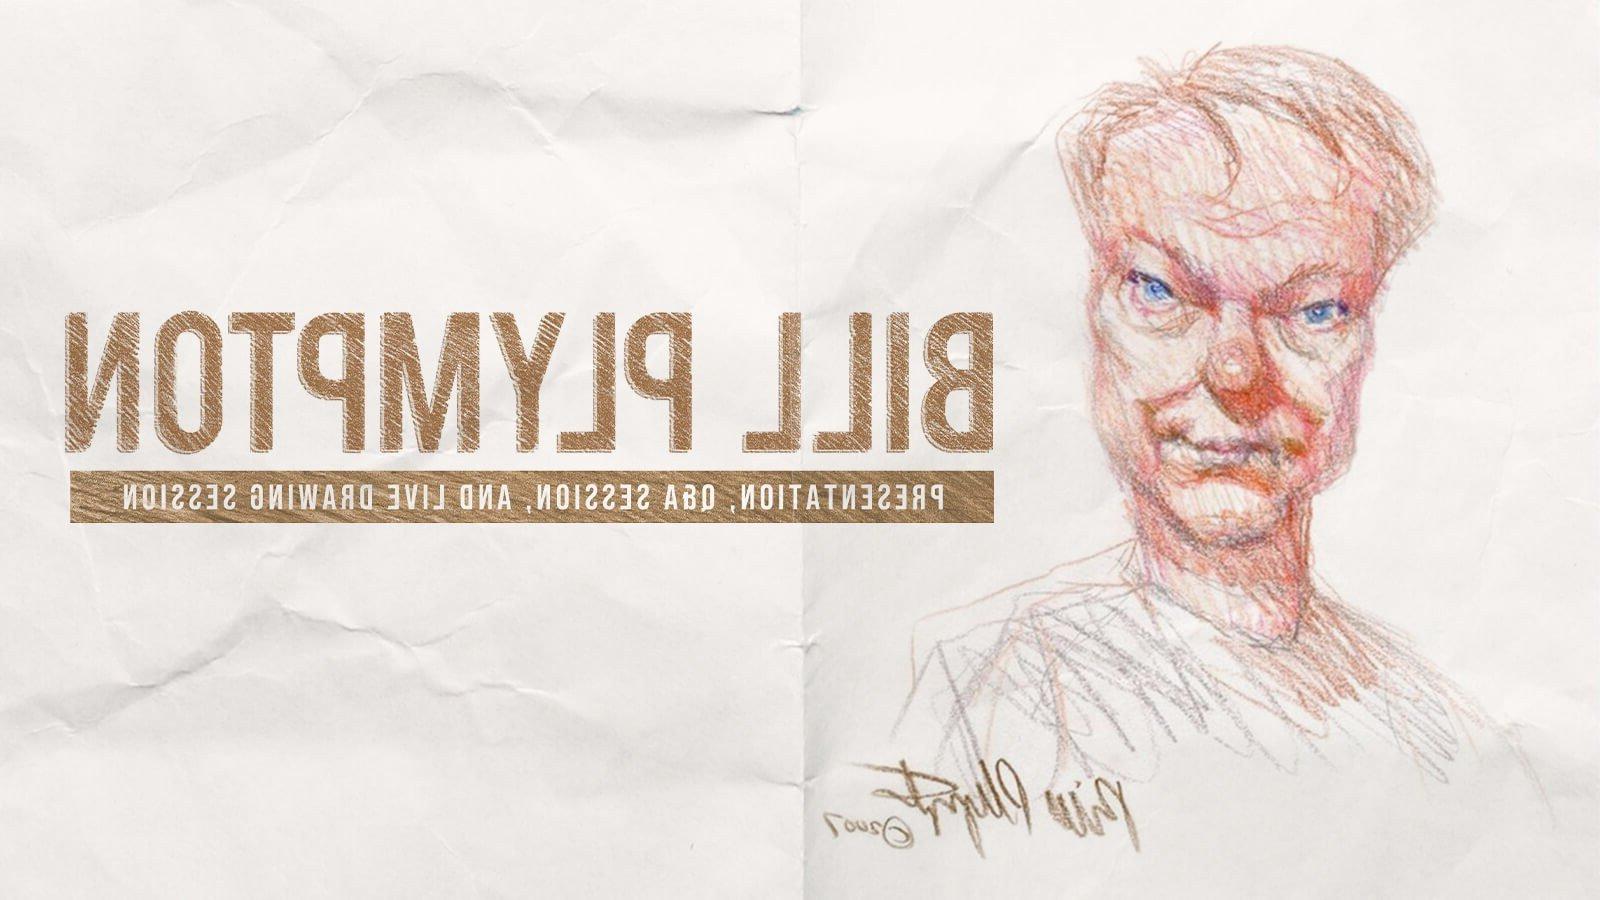 A sketch of American Animator Bill Plympton, drawn and signed by Bill, 位于文本旁边, “Bill Plympton: Presentation, Q&A Session, and Live Drawing Session.